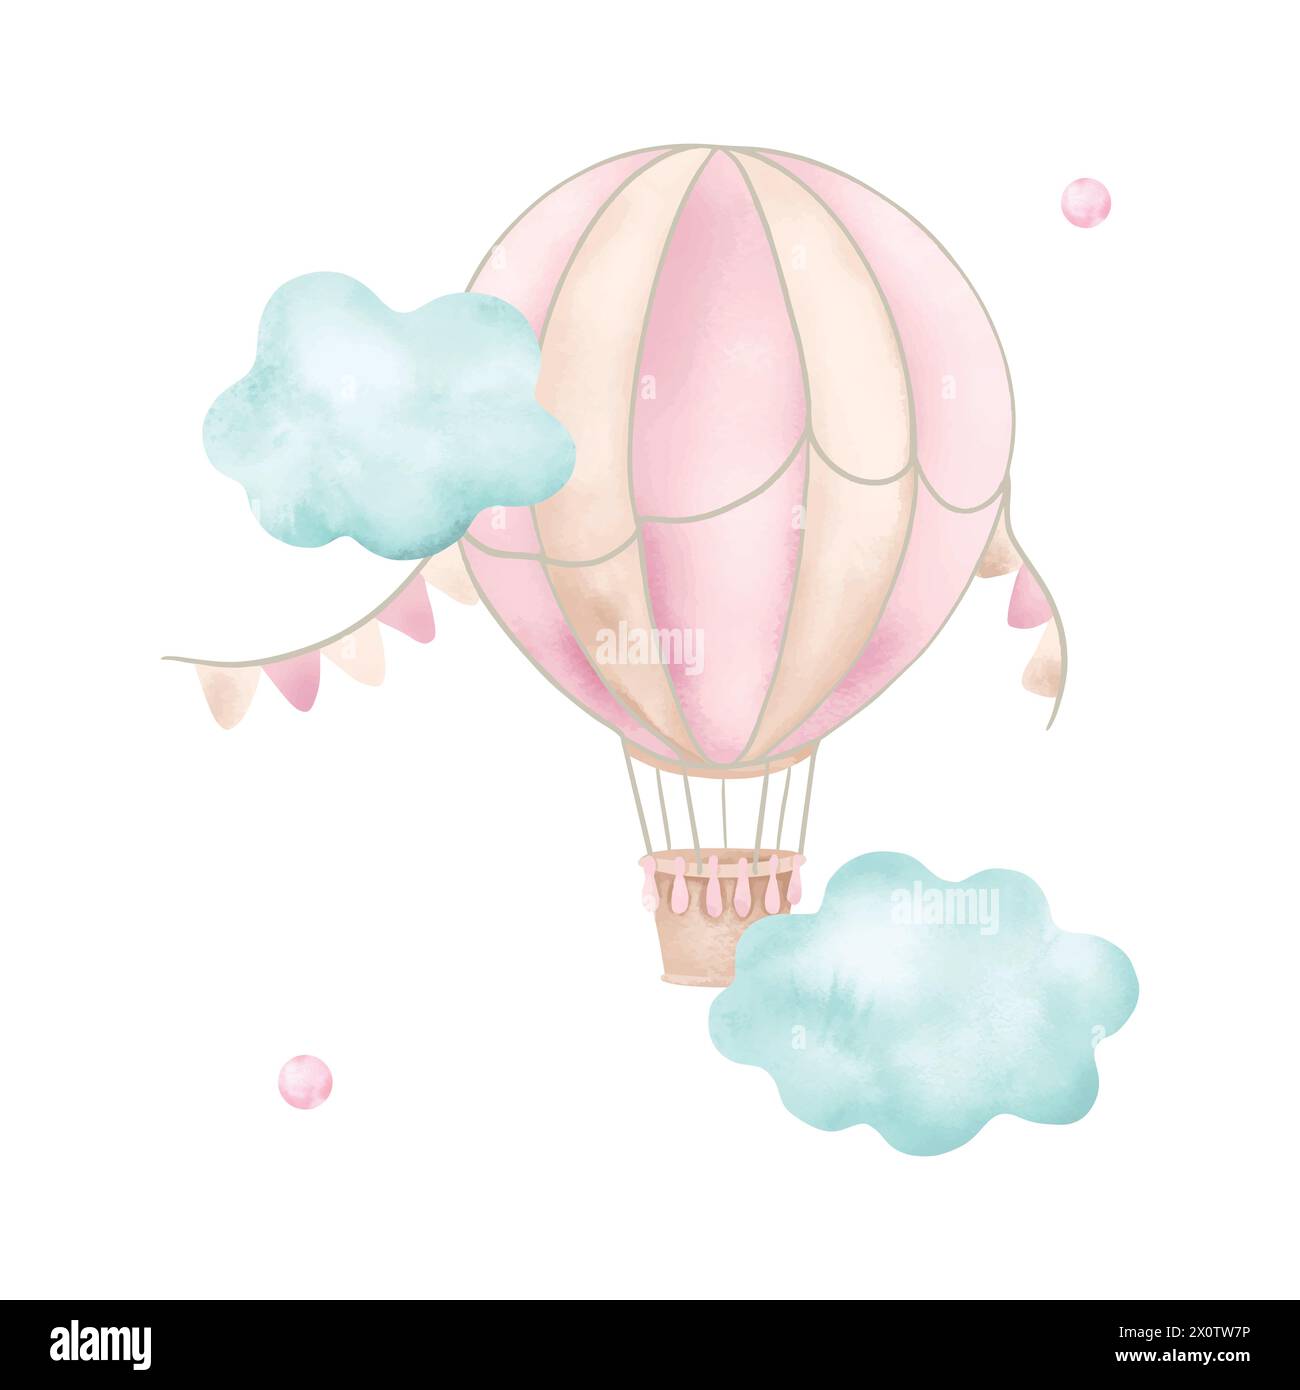 Air balloon, flags, clouds, watercolor. Hand drawn vector illustration for cards, invitations, room design, covers. Hot air balloon in cartoon style. Stock Vector